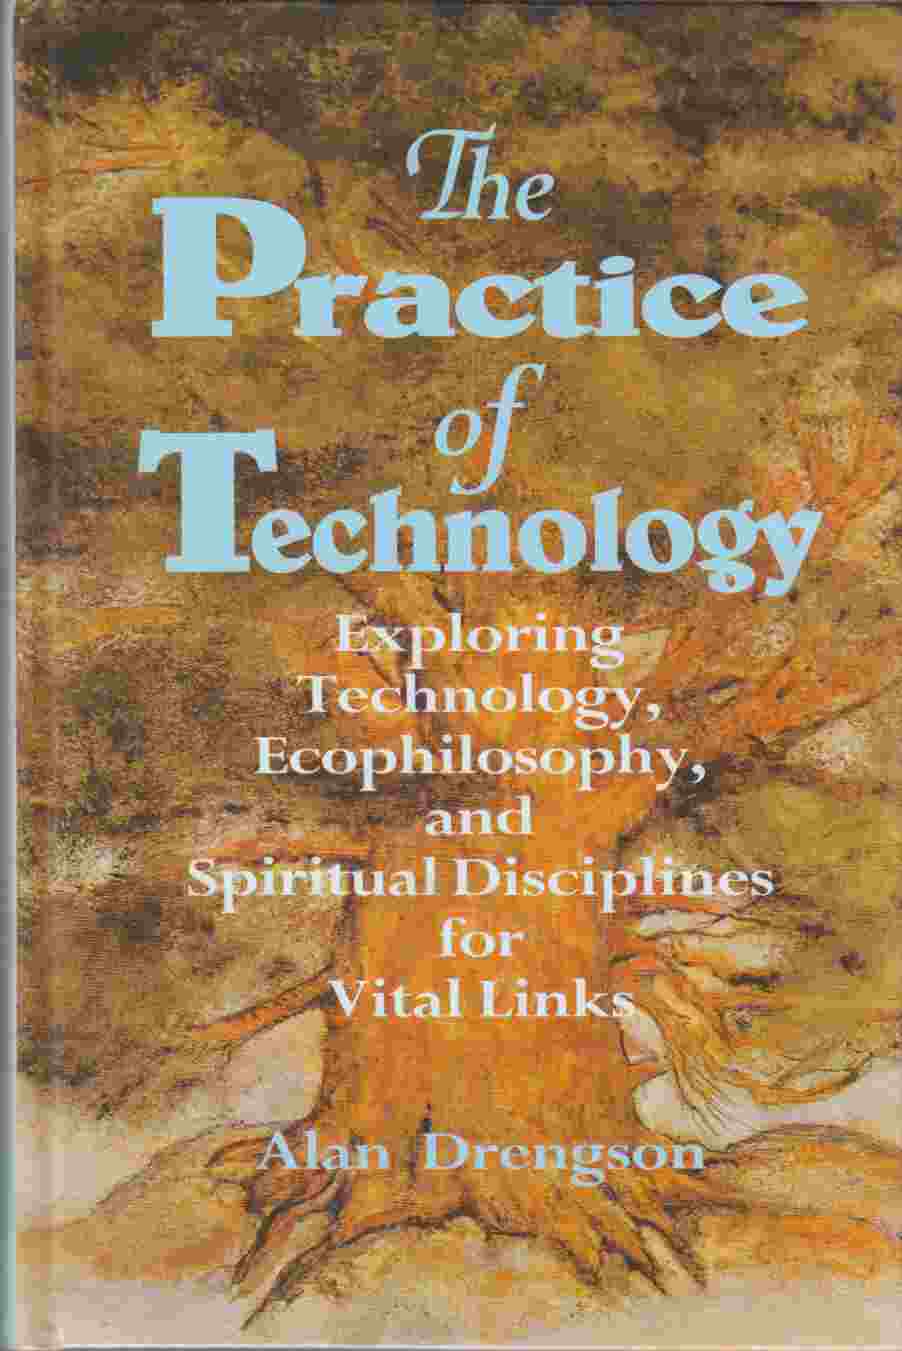 Image for The Practice of Technology Exploring Technology, Ecophilosophy, and Spiritual Disciplines for Vital Links